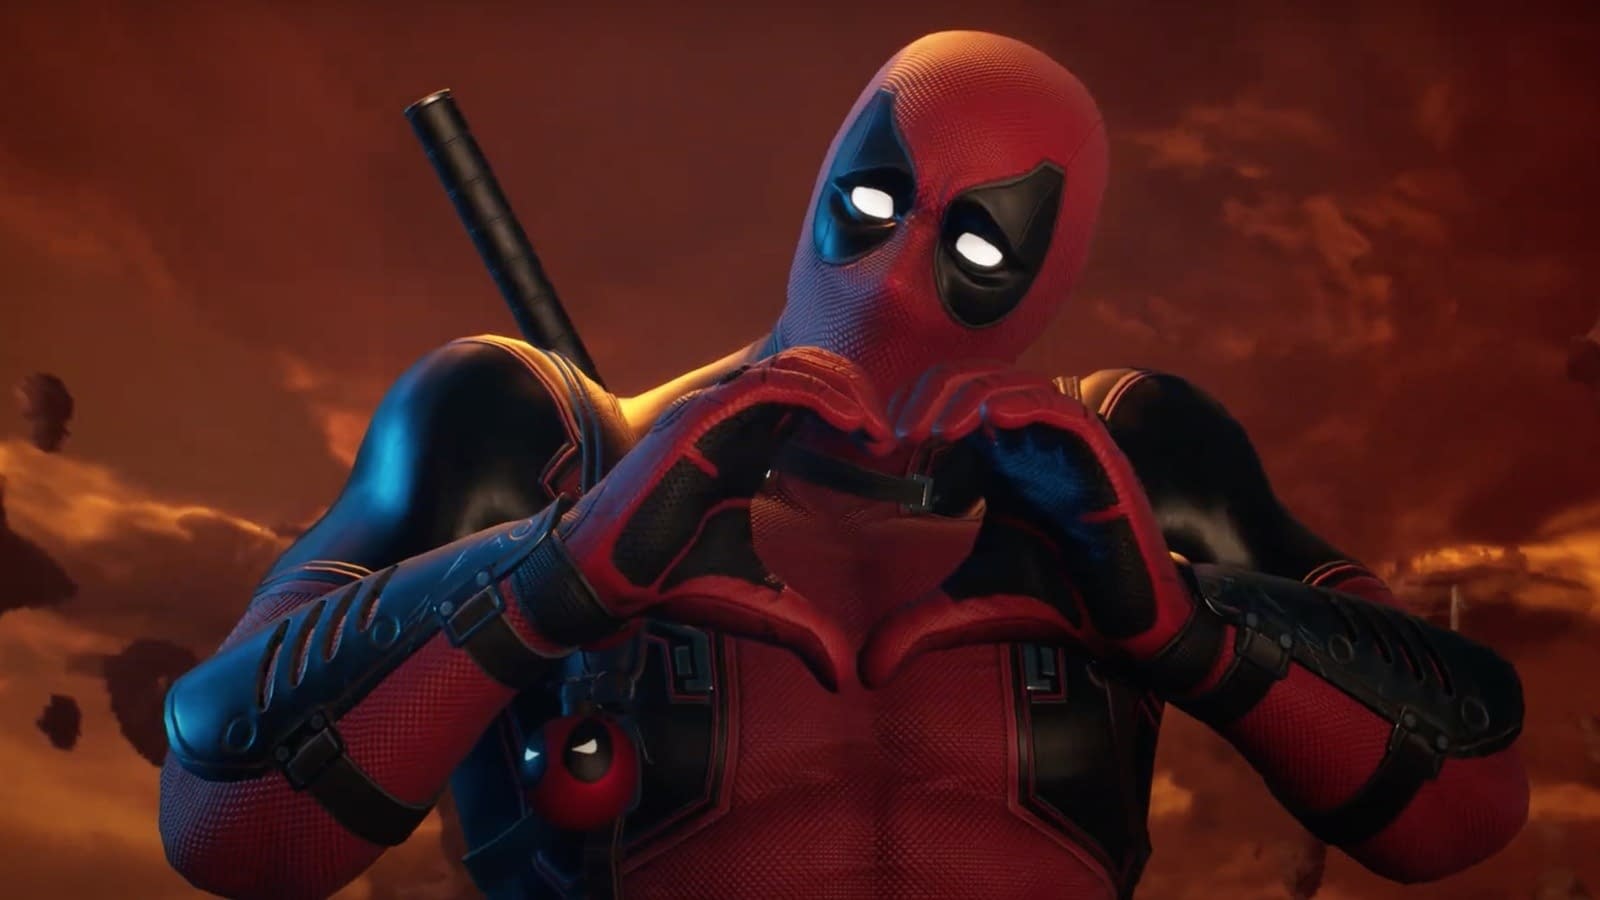 Marvel’s Midnight Comes Deadpool Package to Suns: Release Date Announced